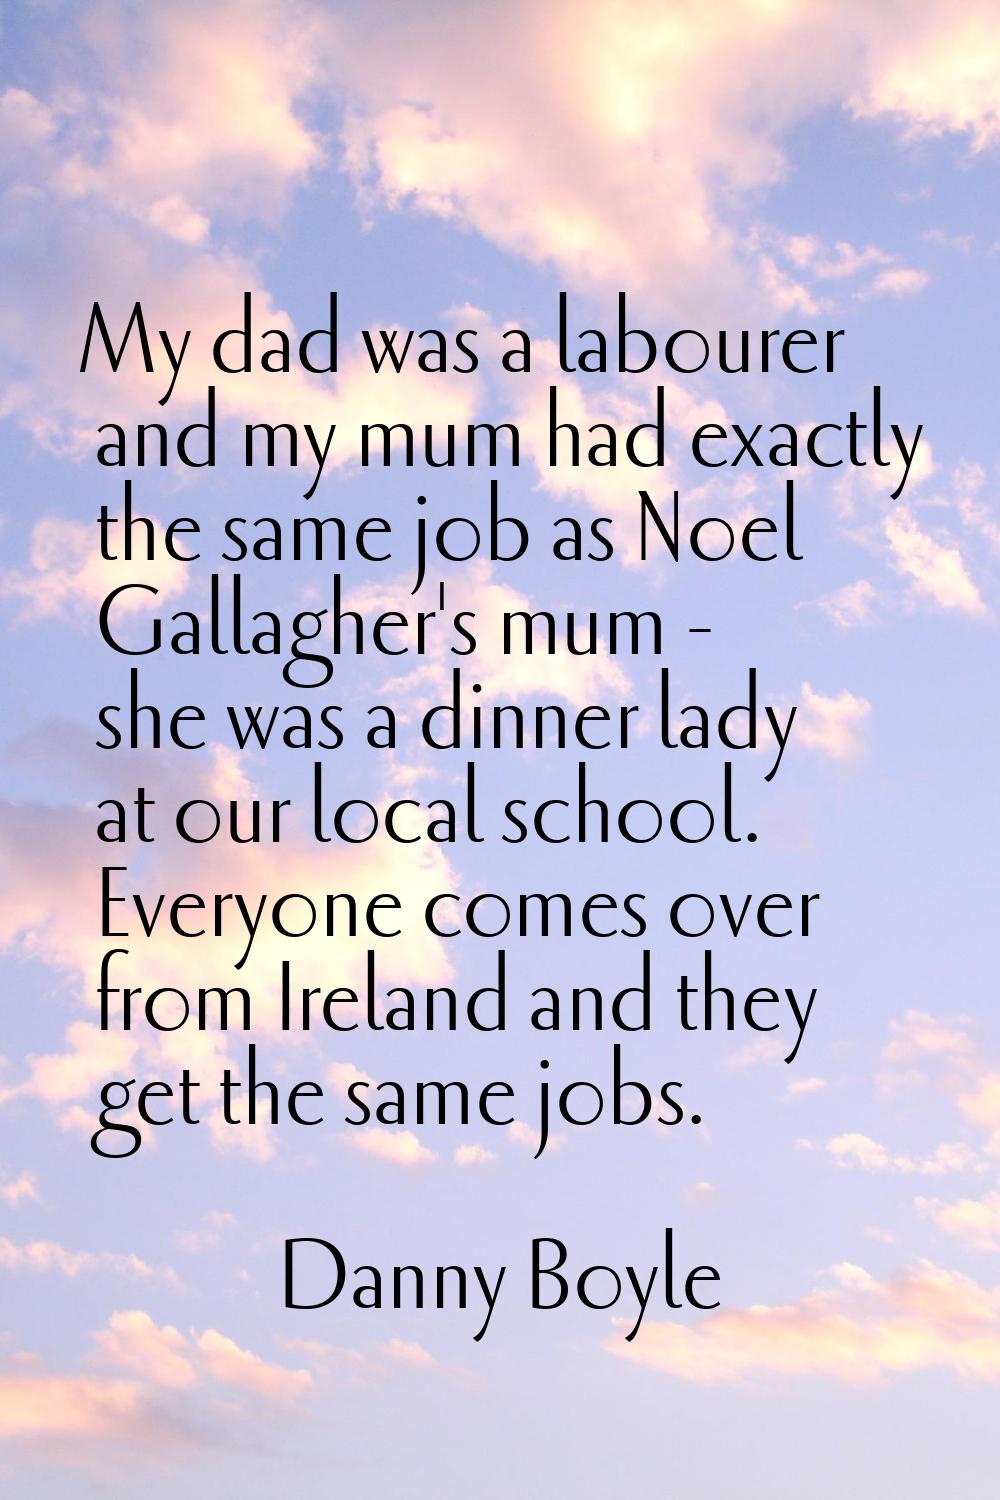 My dad was a labourer and my mum had exactly the same job as Noel Gallagher's mum - she was a dinne